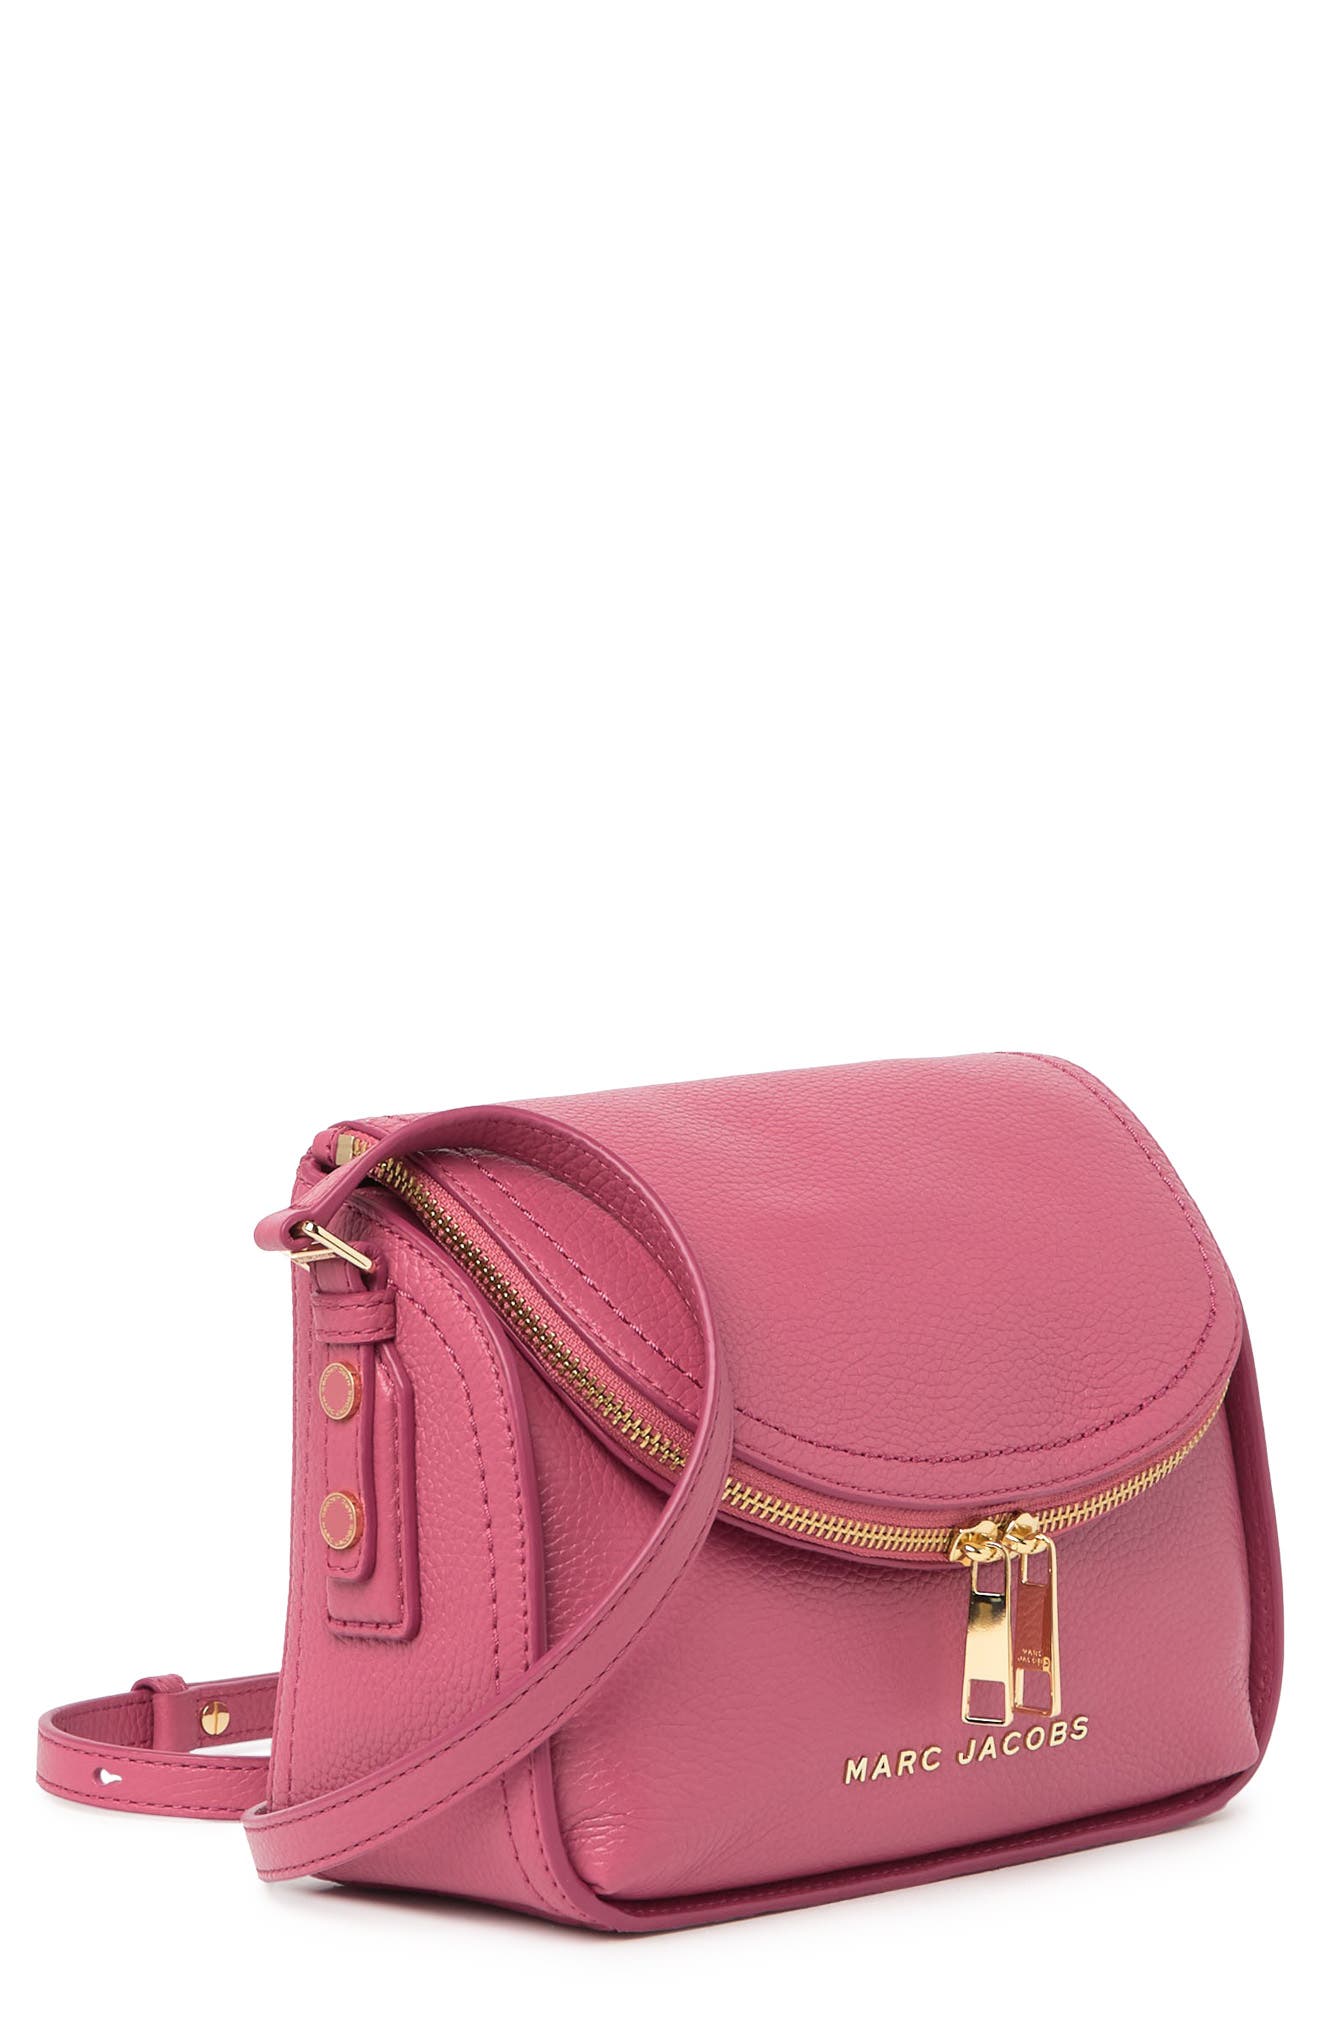 Marc Jacobs The Groove Leather Mini Messenger Bag Nordstrom Rack